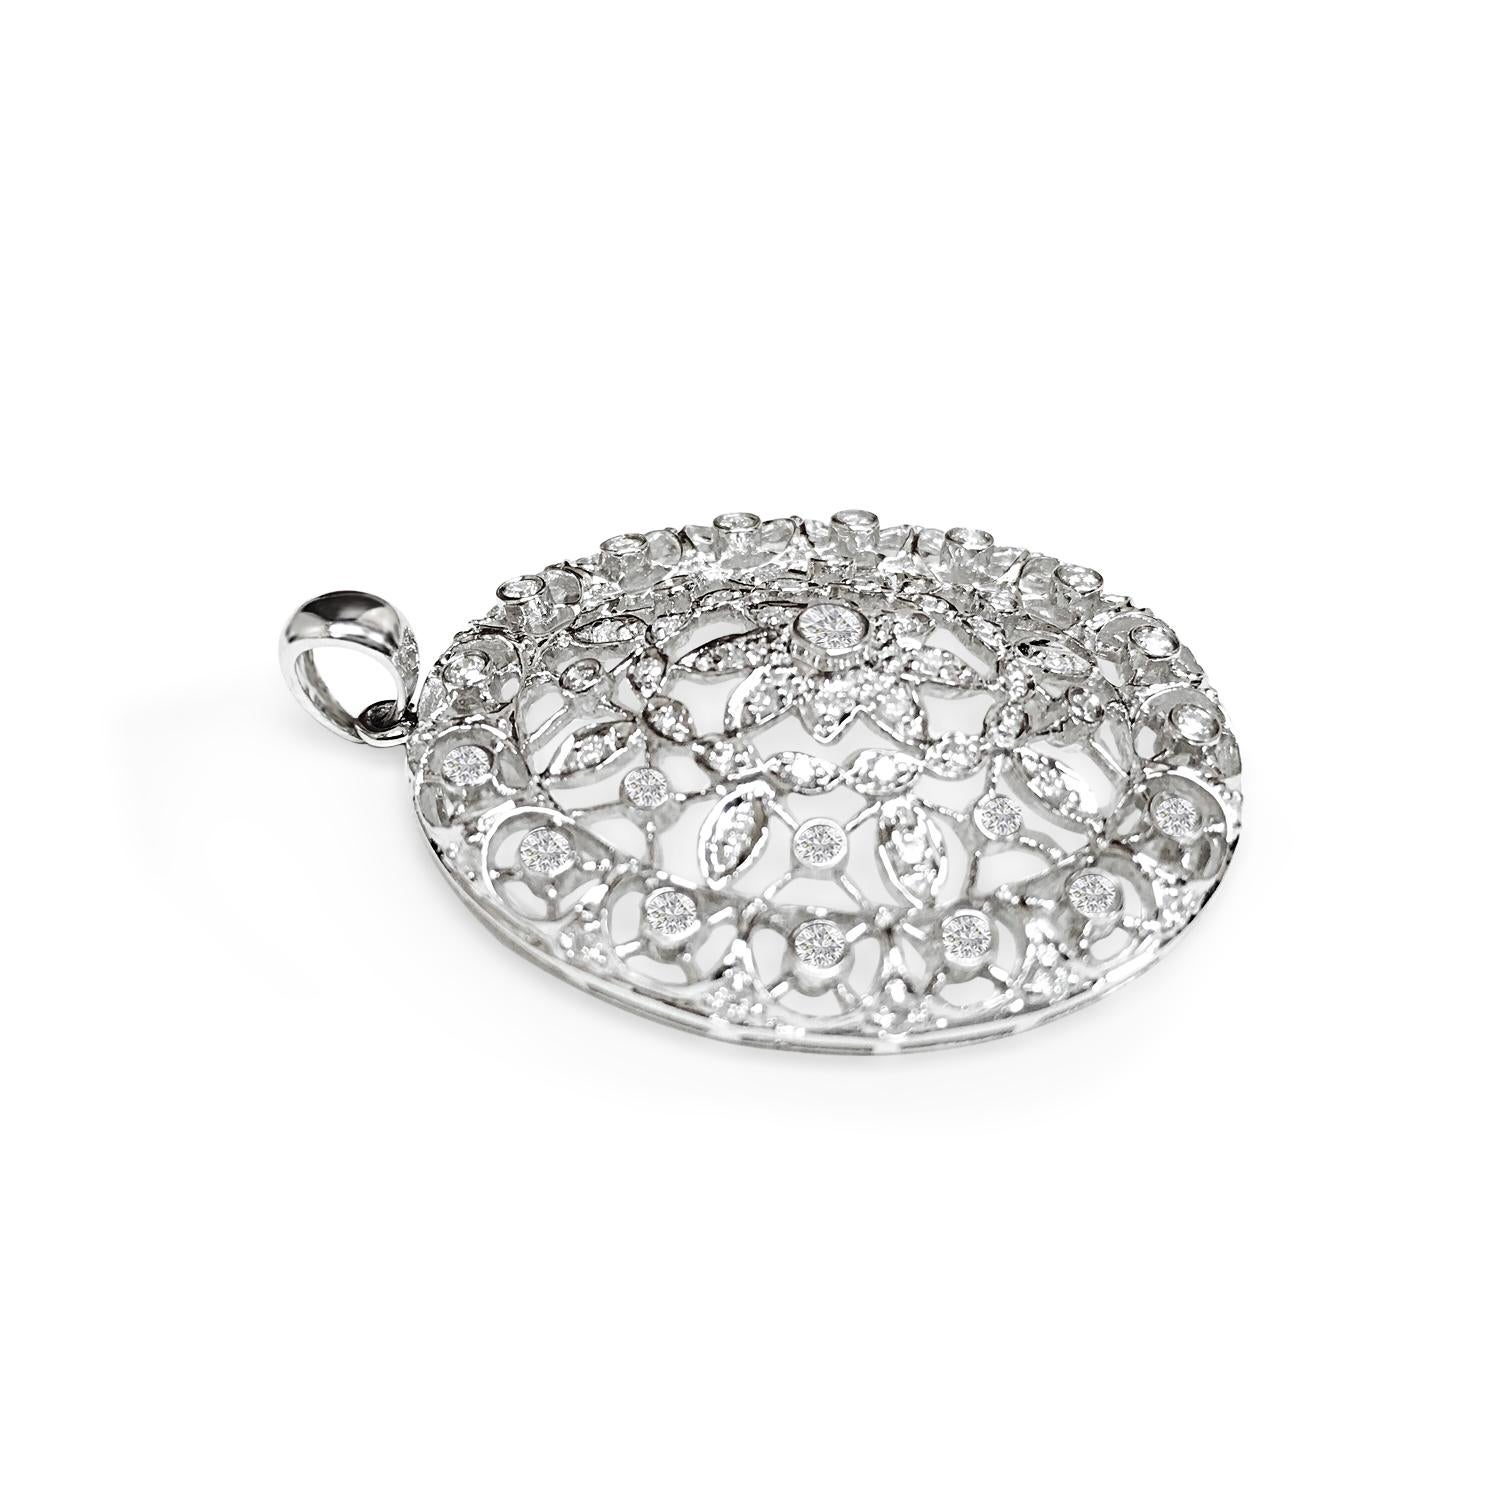 Vintage elegance meets modern sophistication in this 18k white gold pendant adorned with 1.50 carats of round brilliant cut diamonds, boasting VS clarity and F color. Each diamond is meticulously earth mined and exhibits exceptional cut and polish.